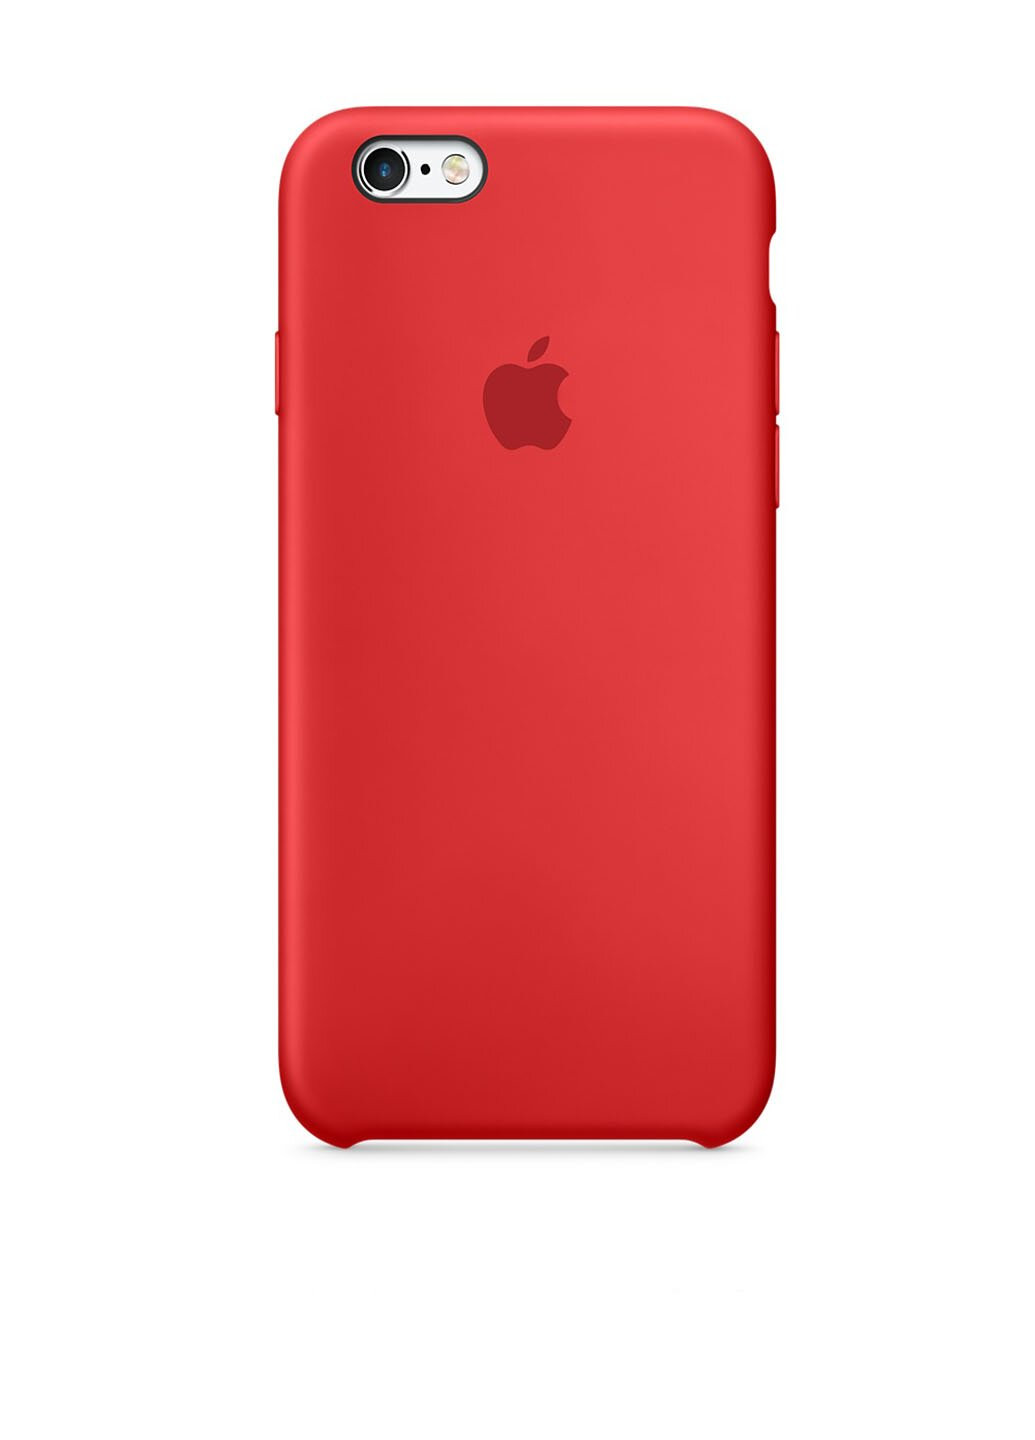 Чехол Silicone Case для iPhone SE/5s/5 product red ARM (110130326)